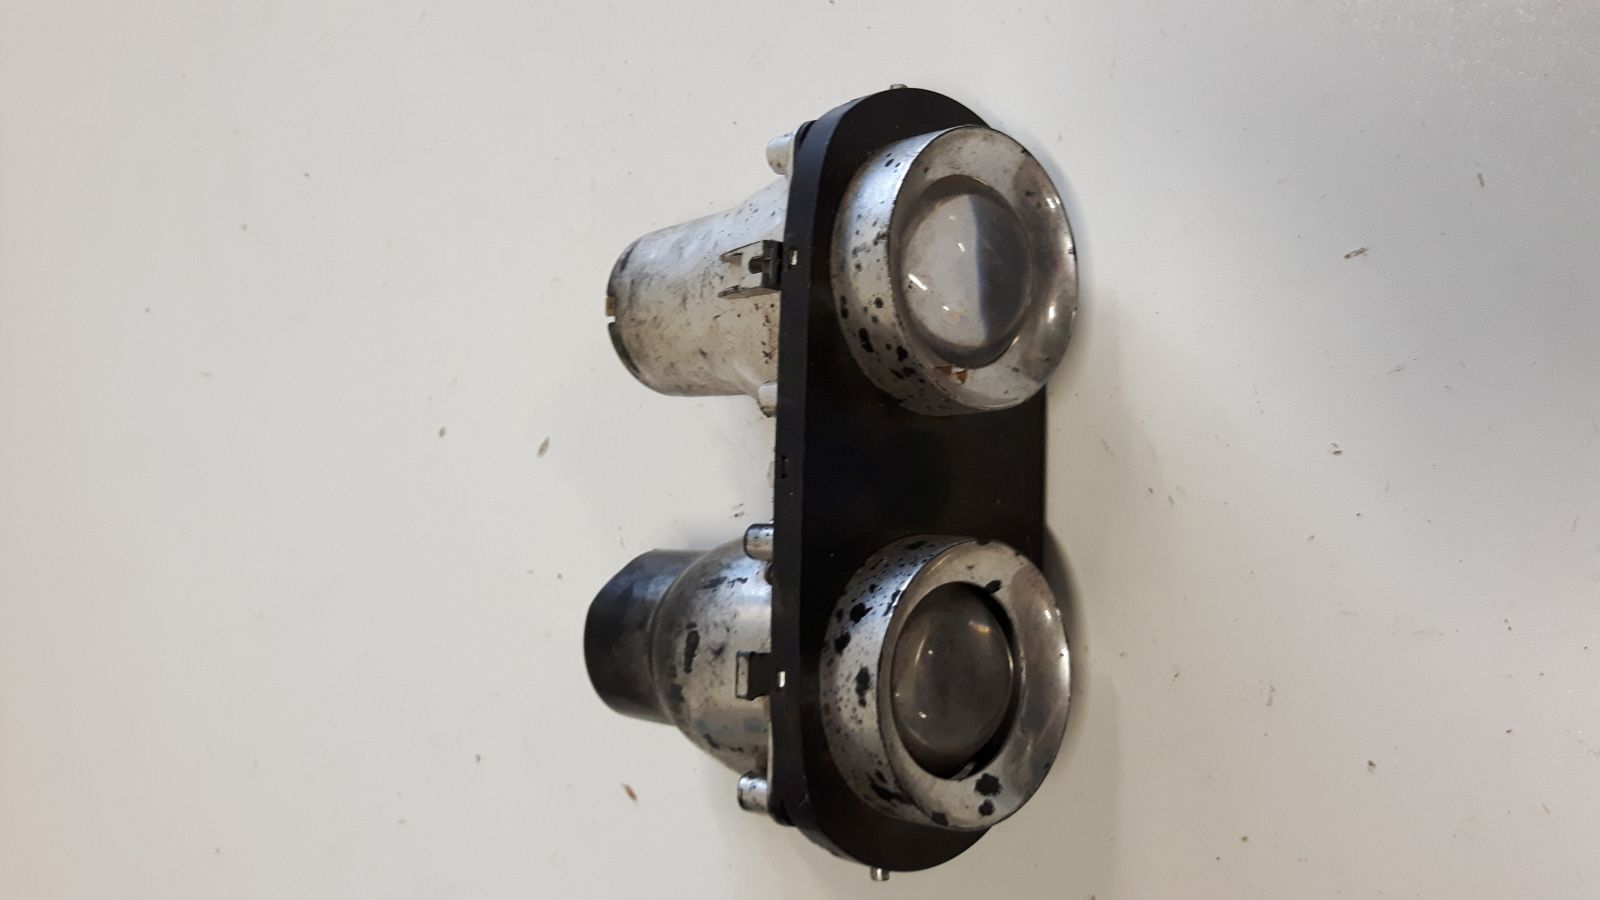 Headlight for scooter or moped